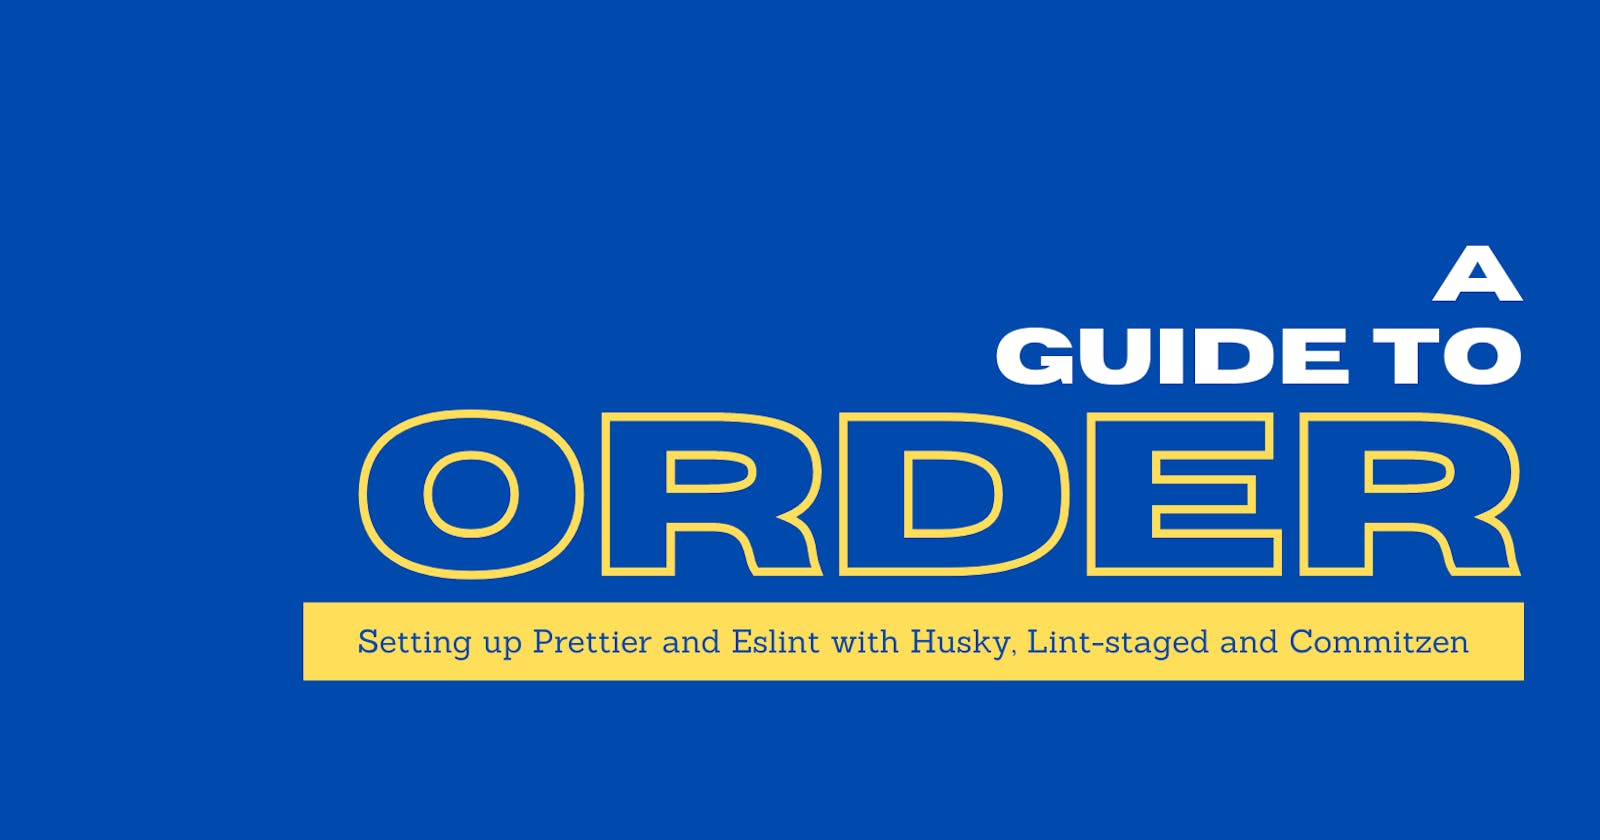 A Guide to Order: Setting up Prettier and Eslint with Husky, Lint-staged and Commitizen